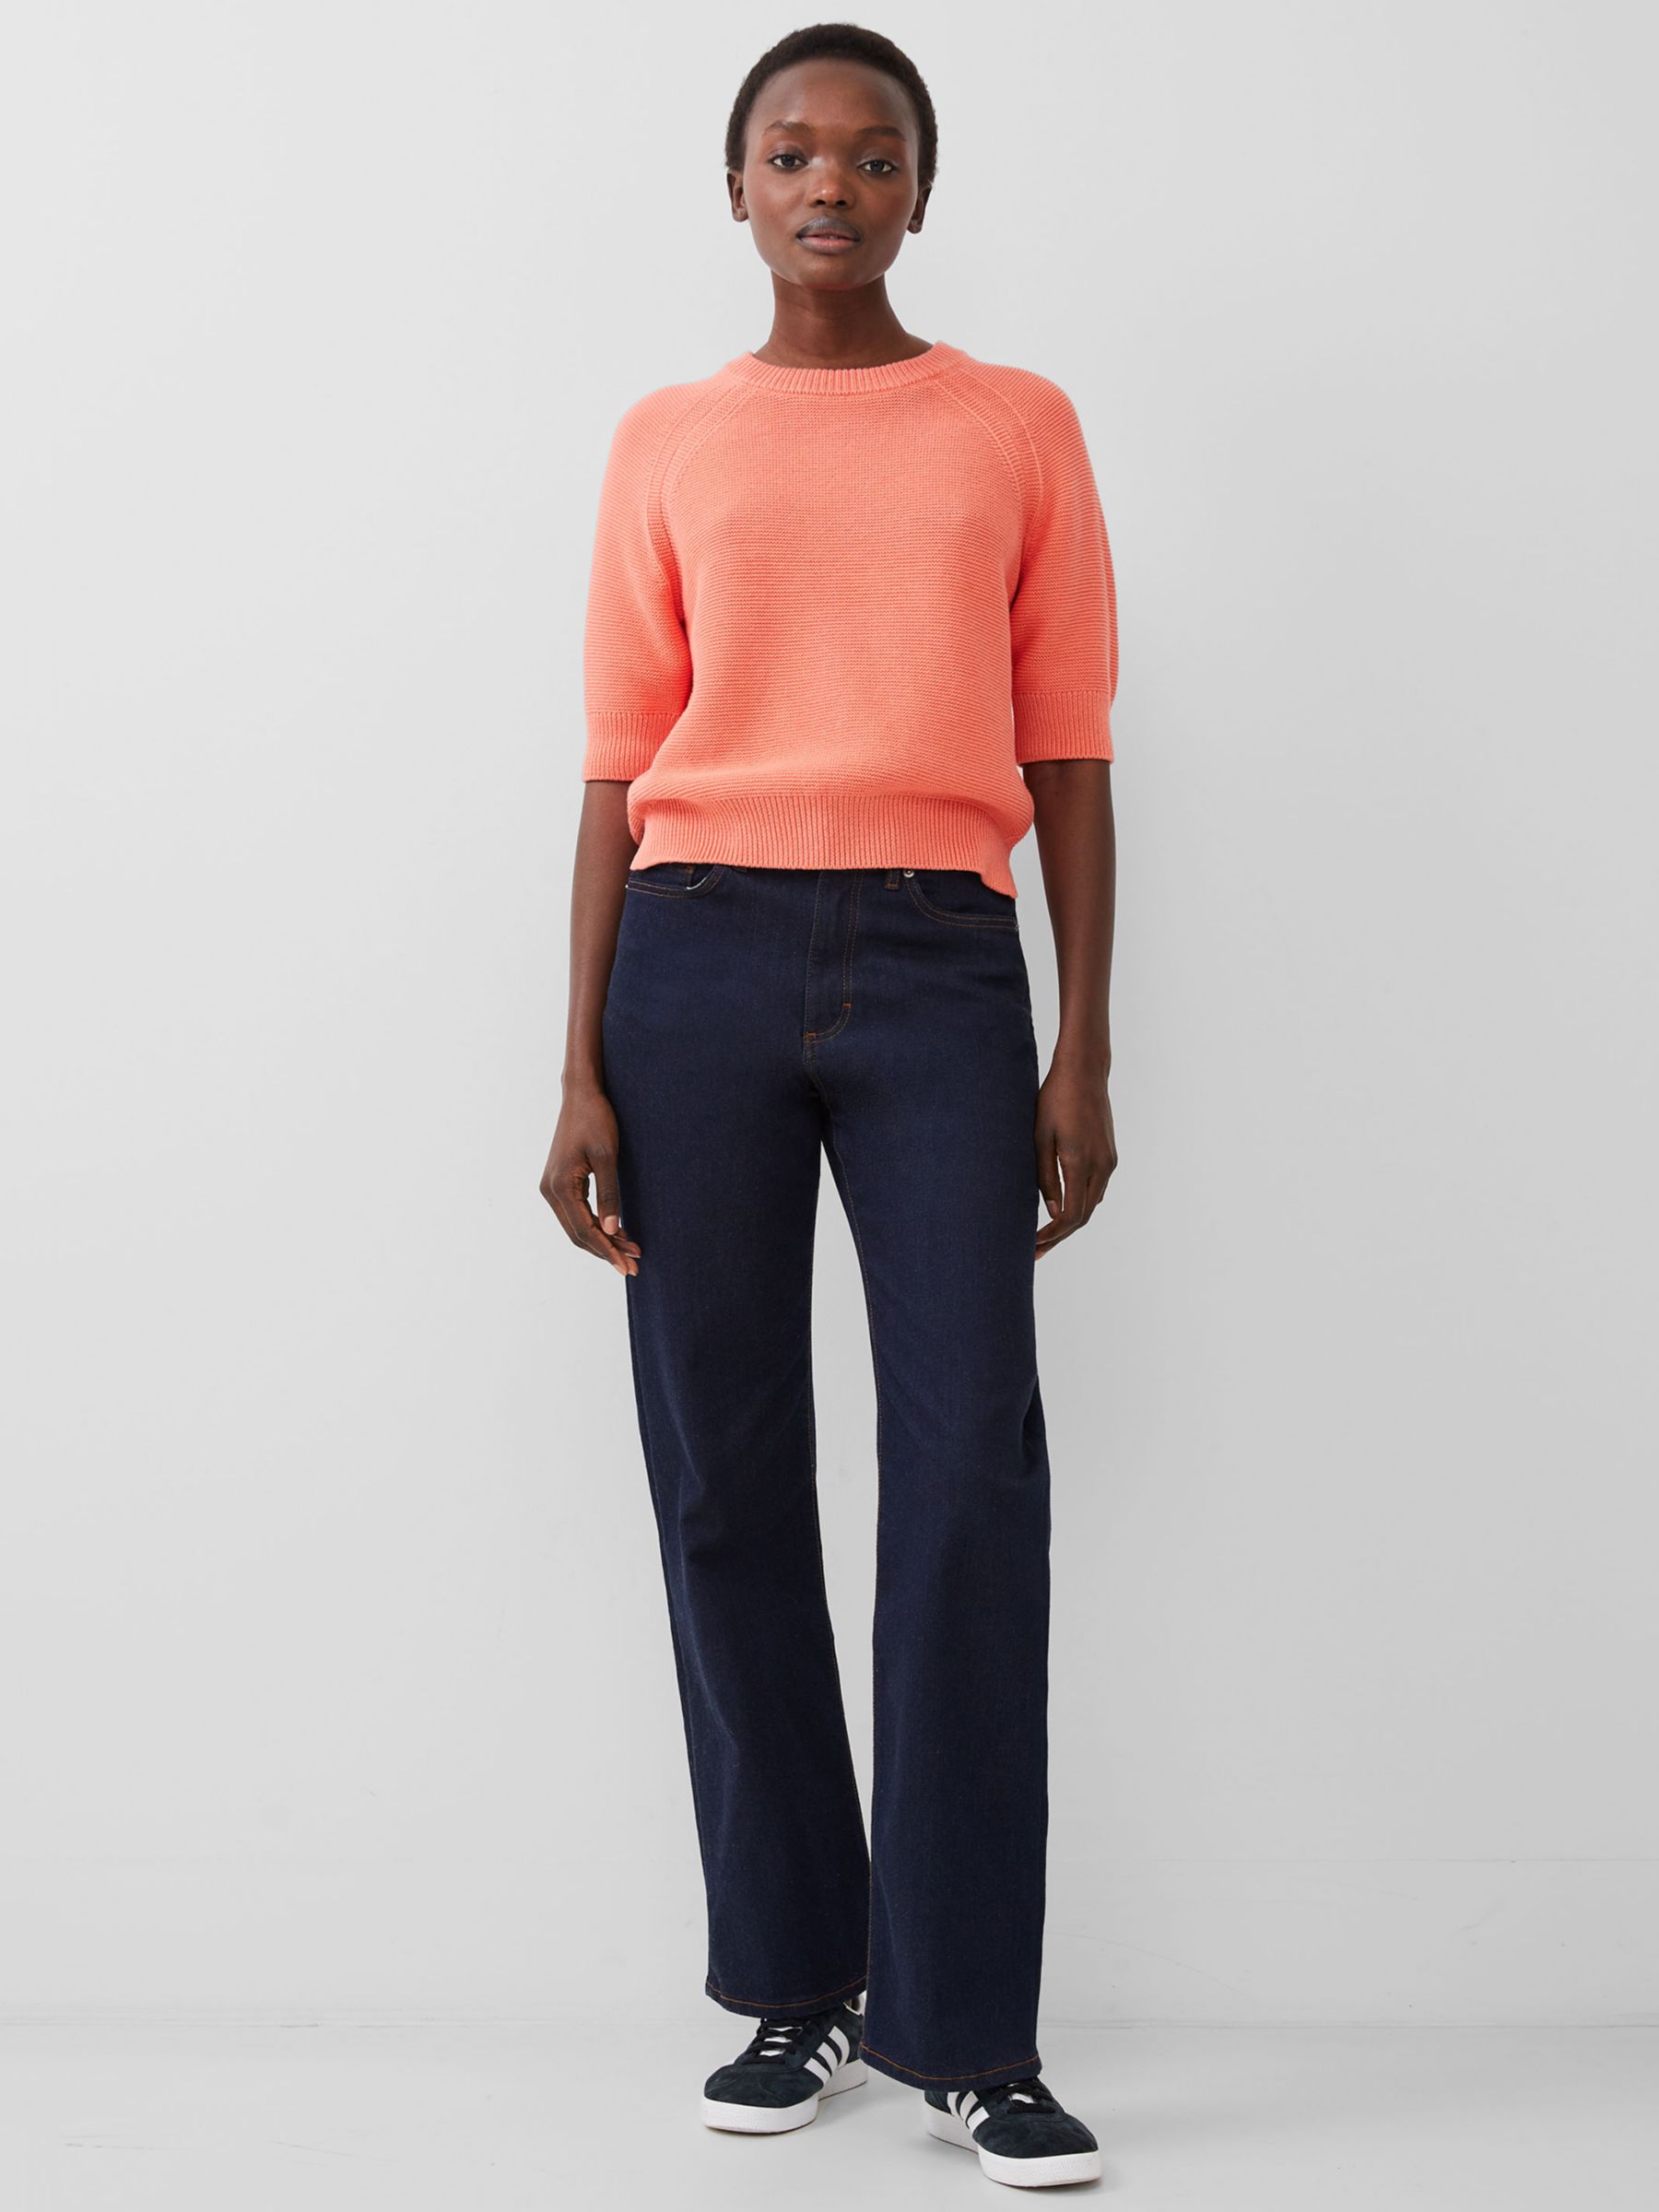 French Connection Lily Mozart Cotton Jumper, Coral at John Lewis & Partners